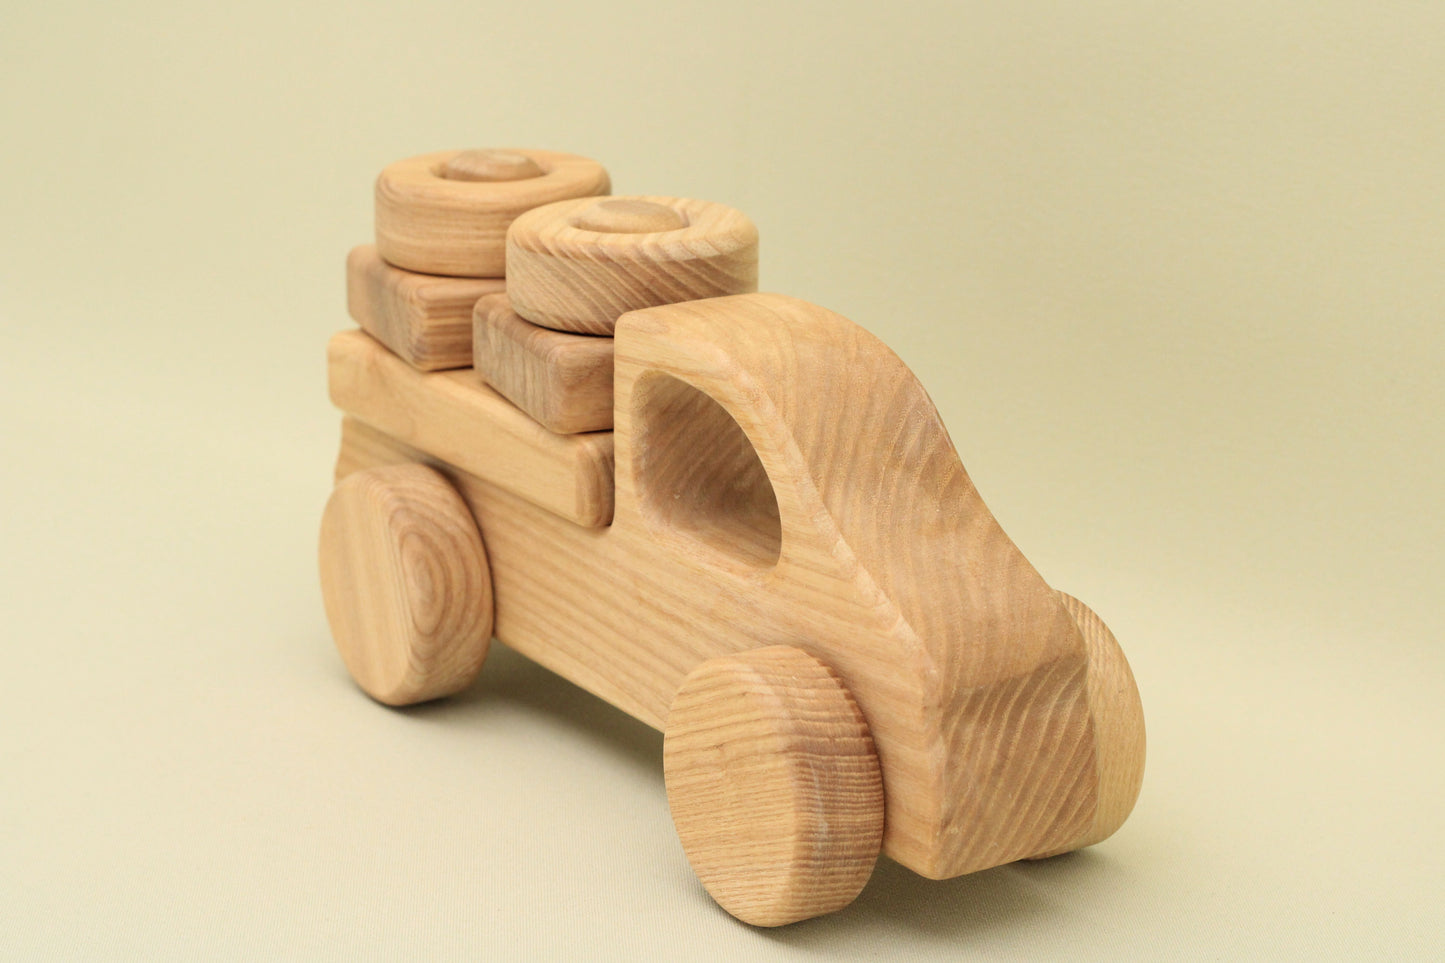 Lotes Toys Wooden Construction Vehicles Car BT09